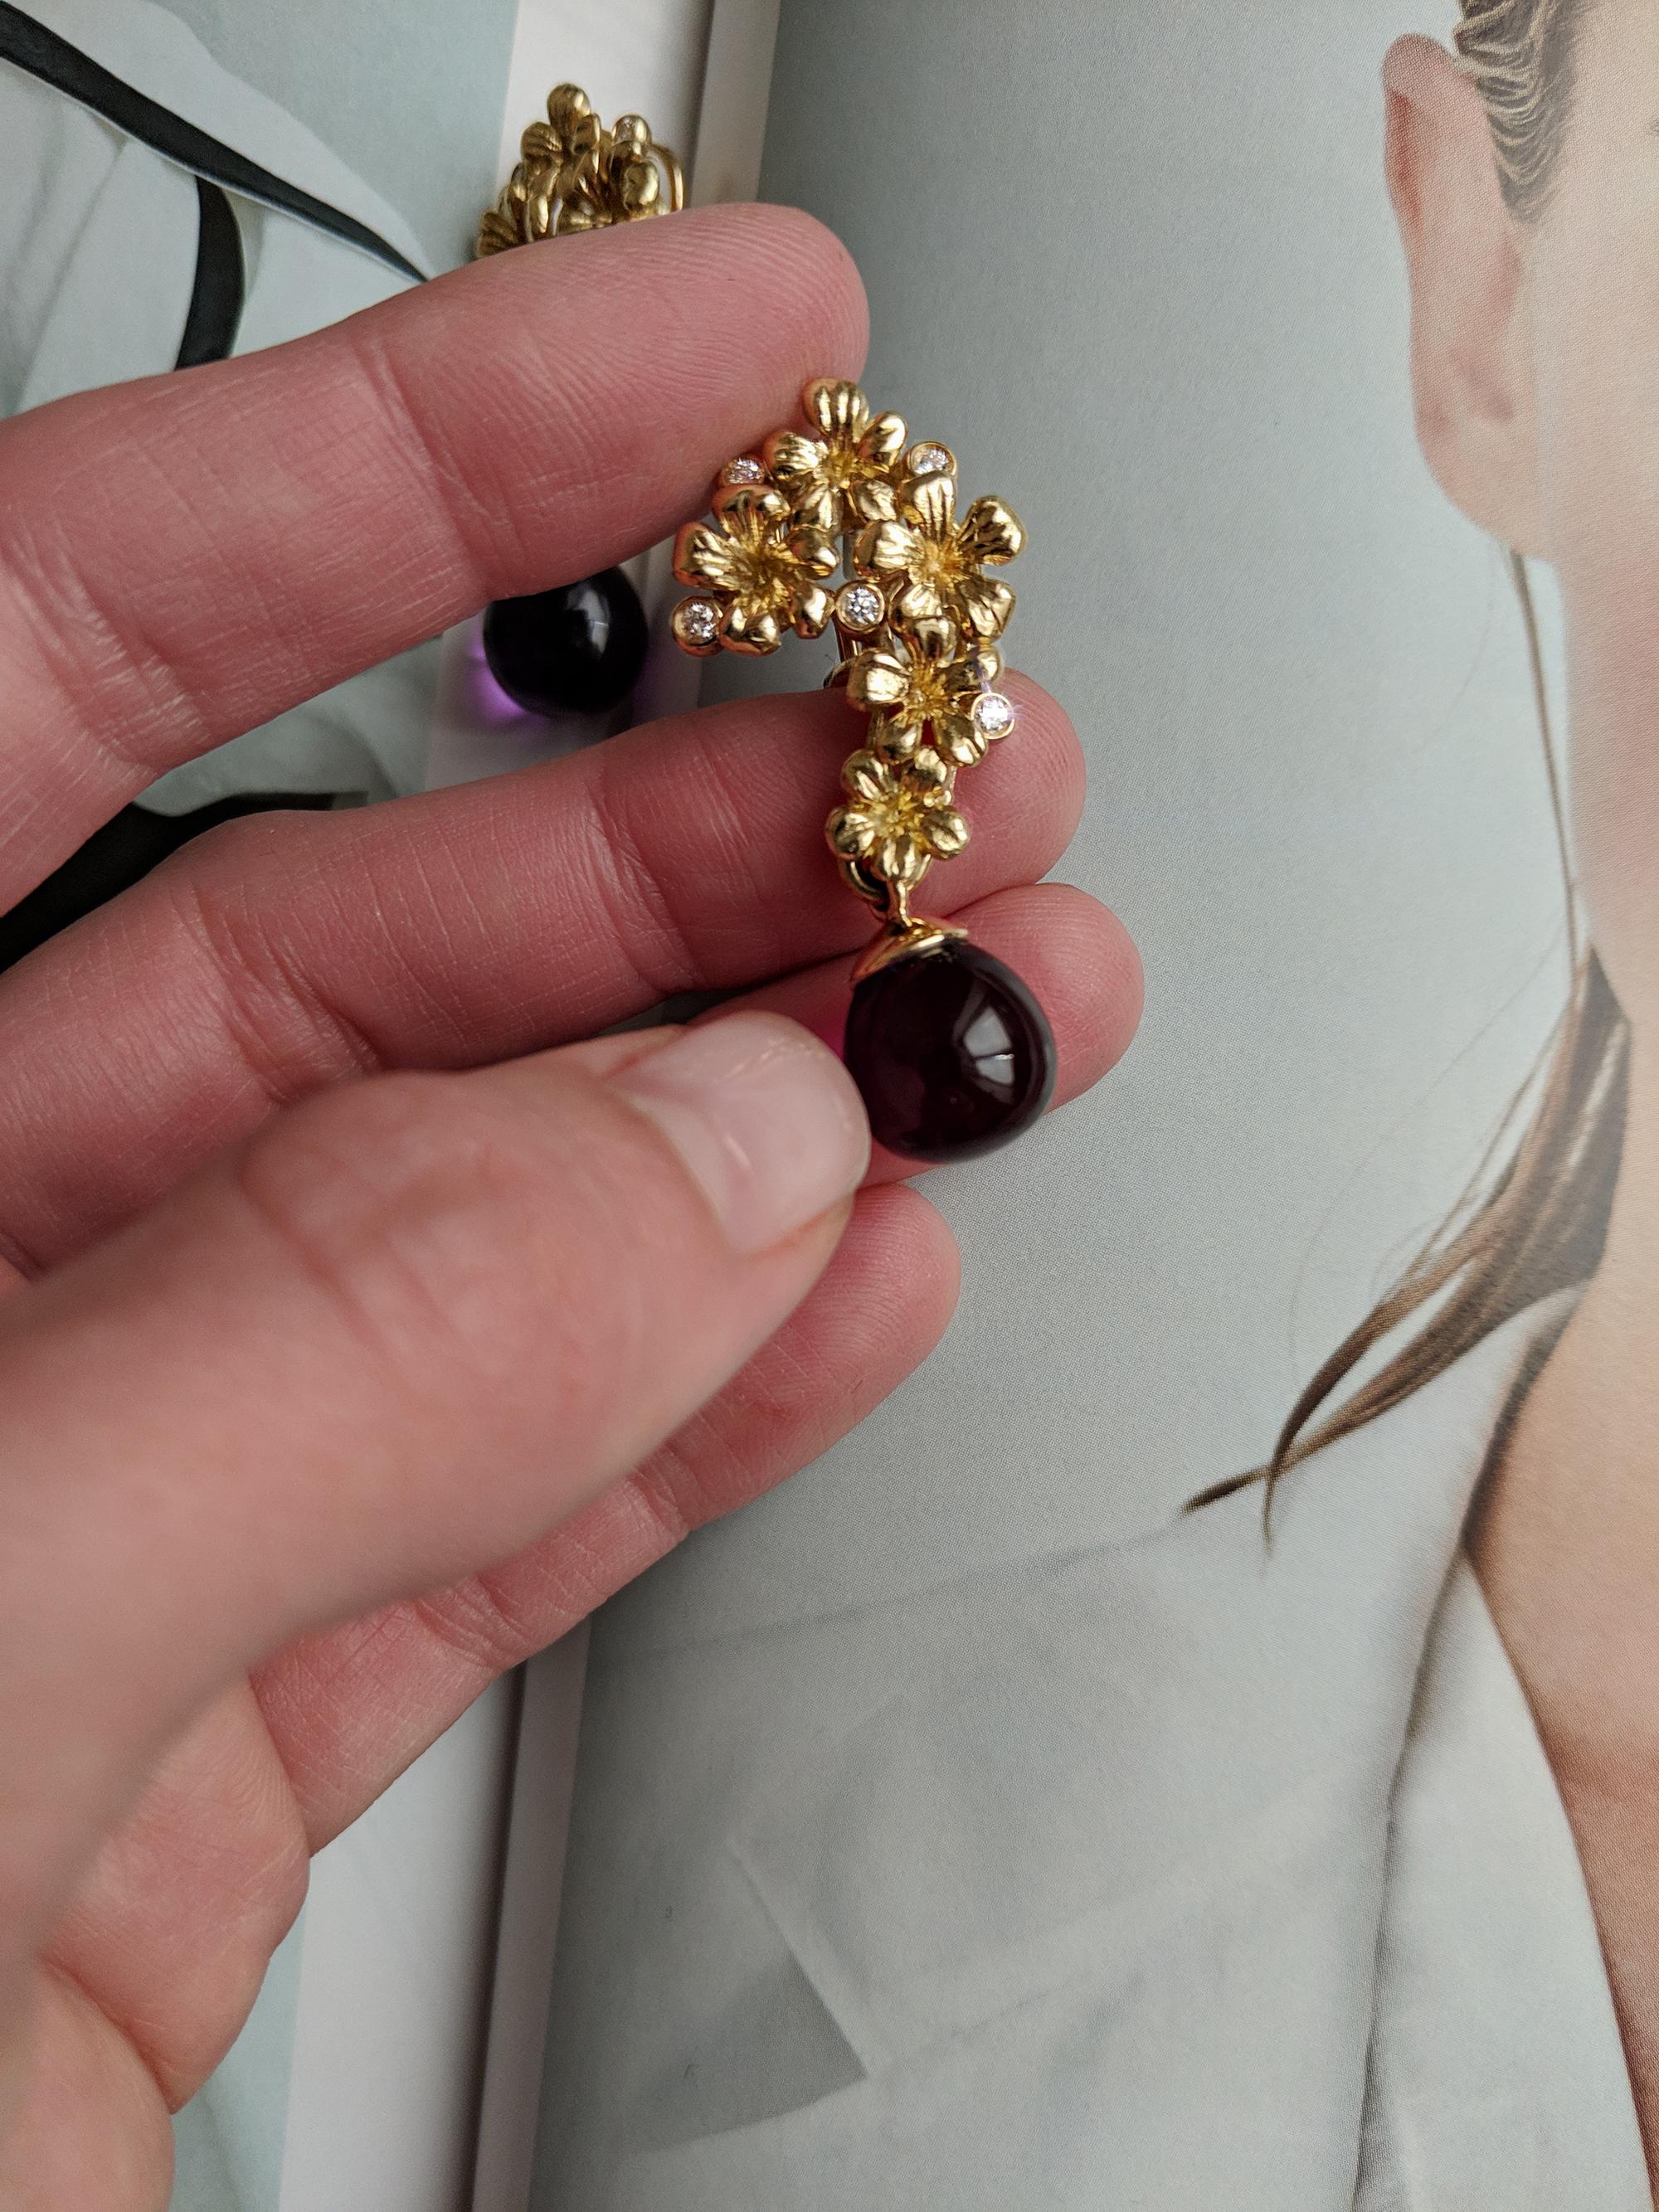 This Plum Blossom brooch in 14 karat yellow gold with detachable amethyst is encrusted with five round diamonds and has been featured in Vogue UA reviews. The cabochon amethyst is removable and exchangeable for other stone drops. We use top-quality